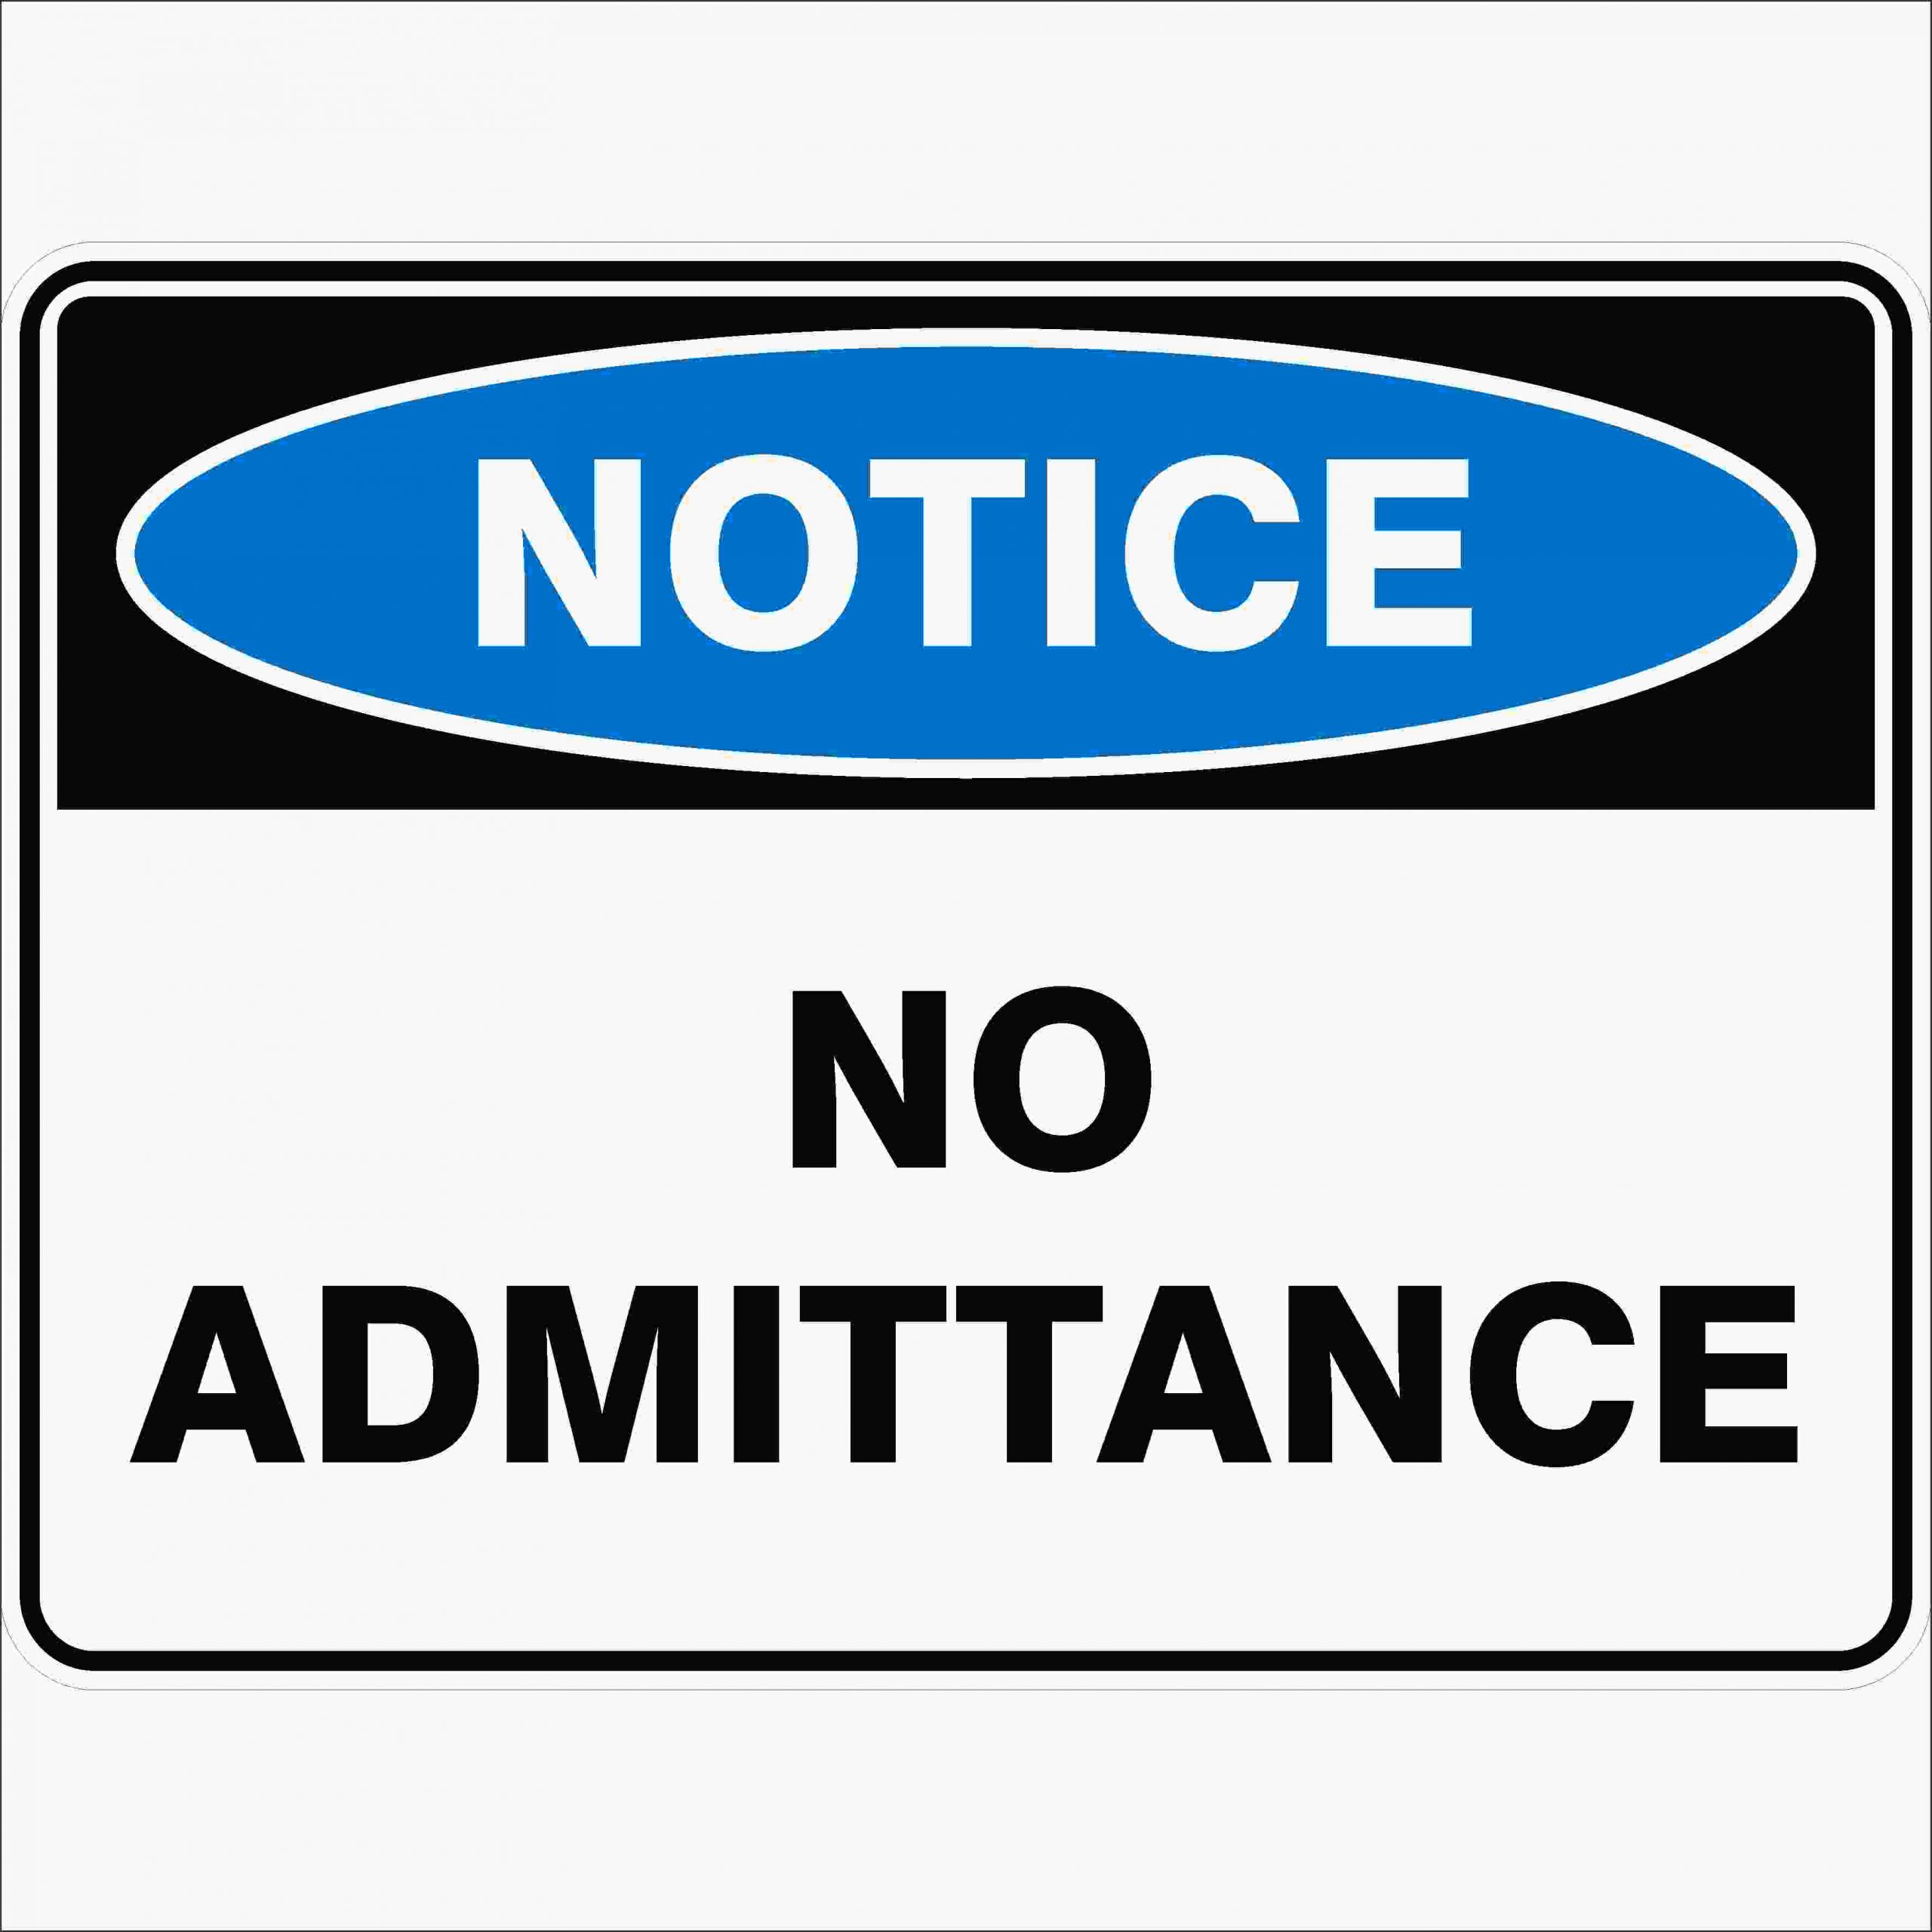 Notice - No Admittance - Safety Sign